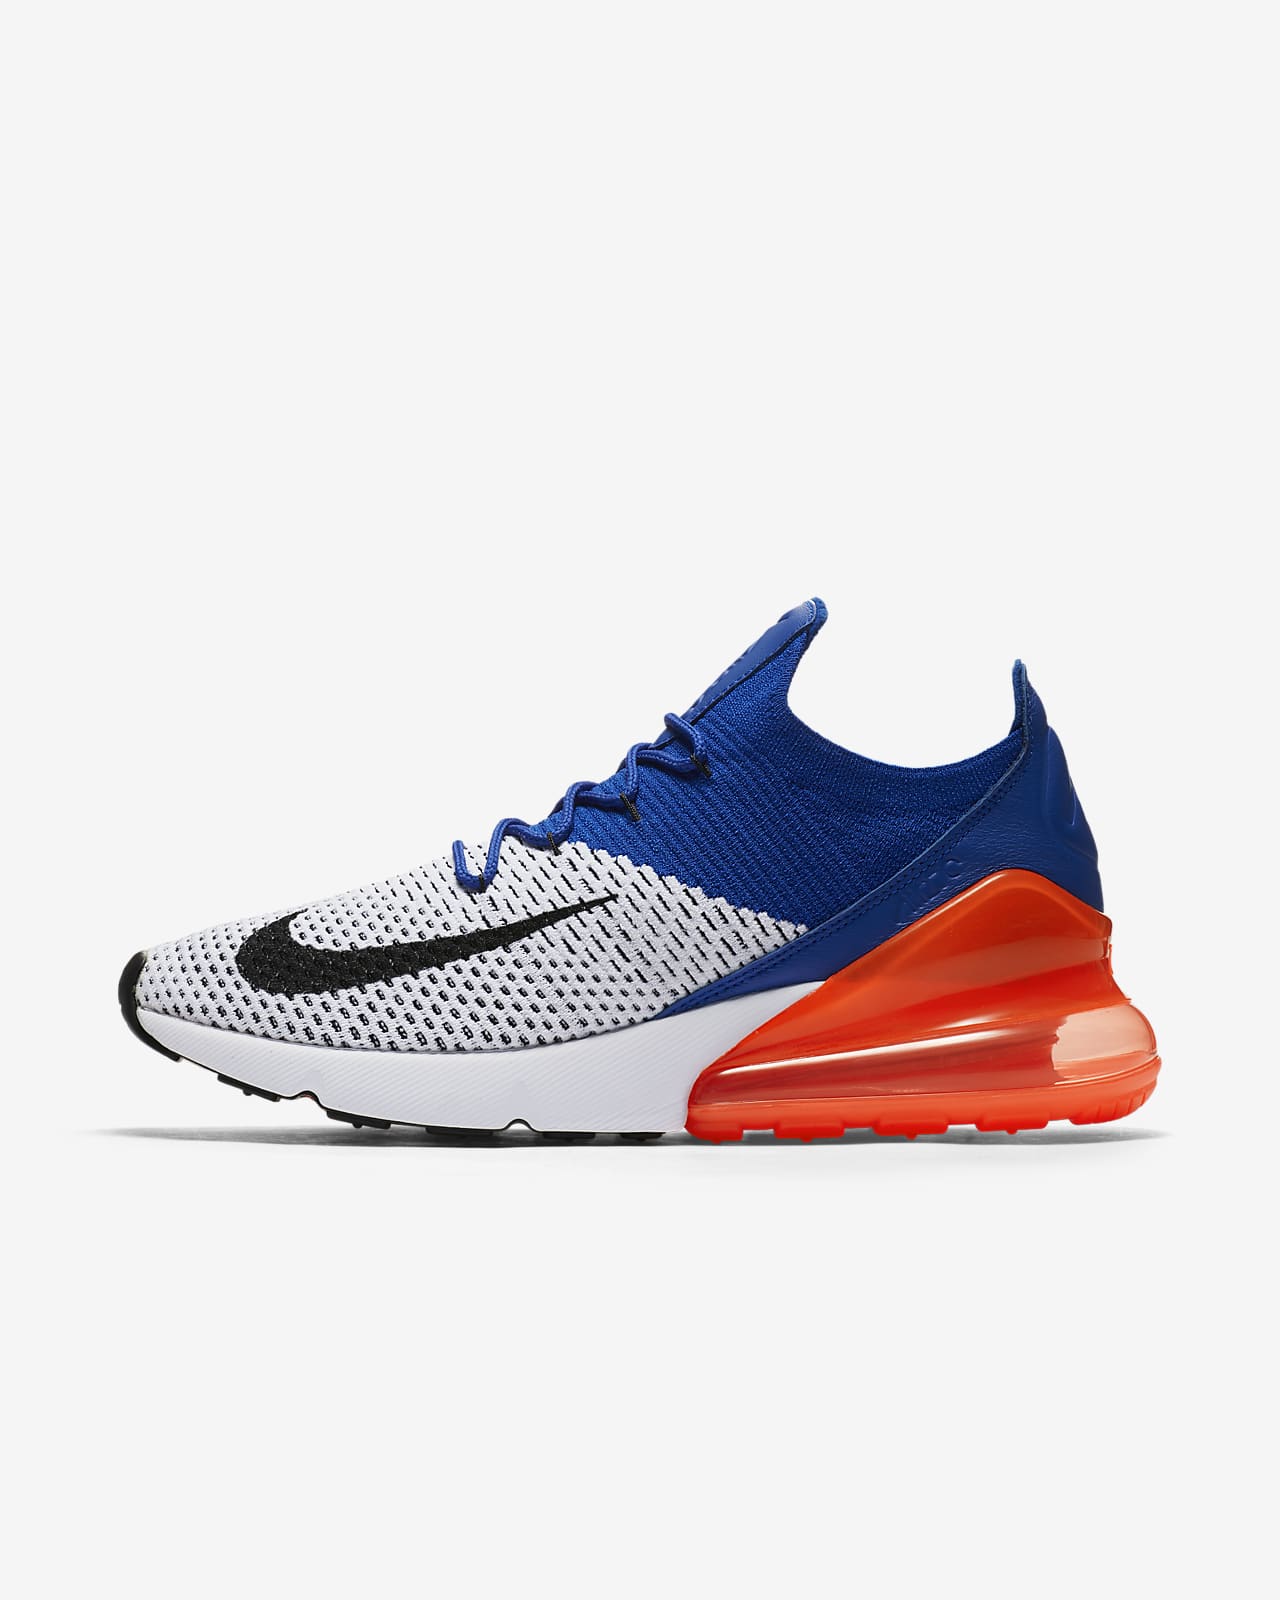 nike air max 270 flyknit men's Online Shopping mall | Find the ...